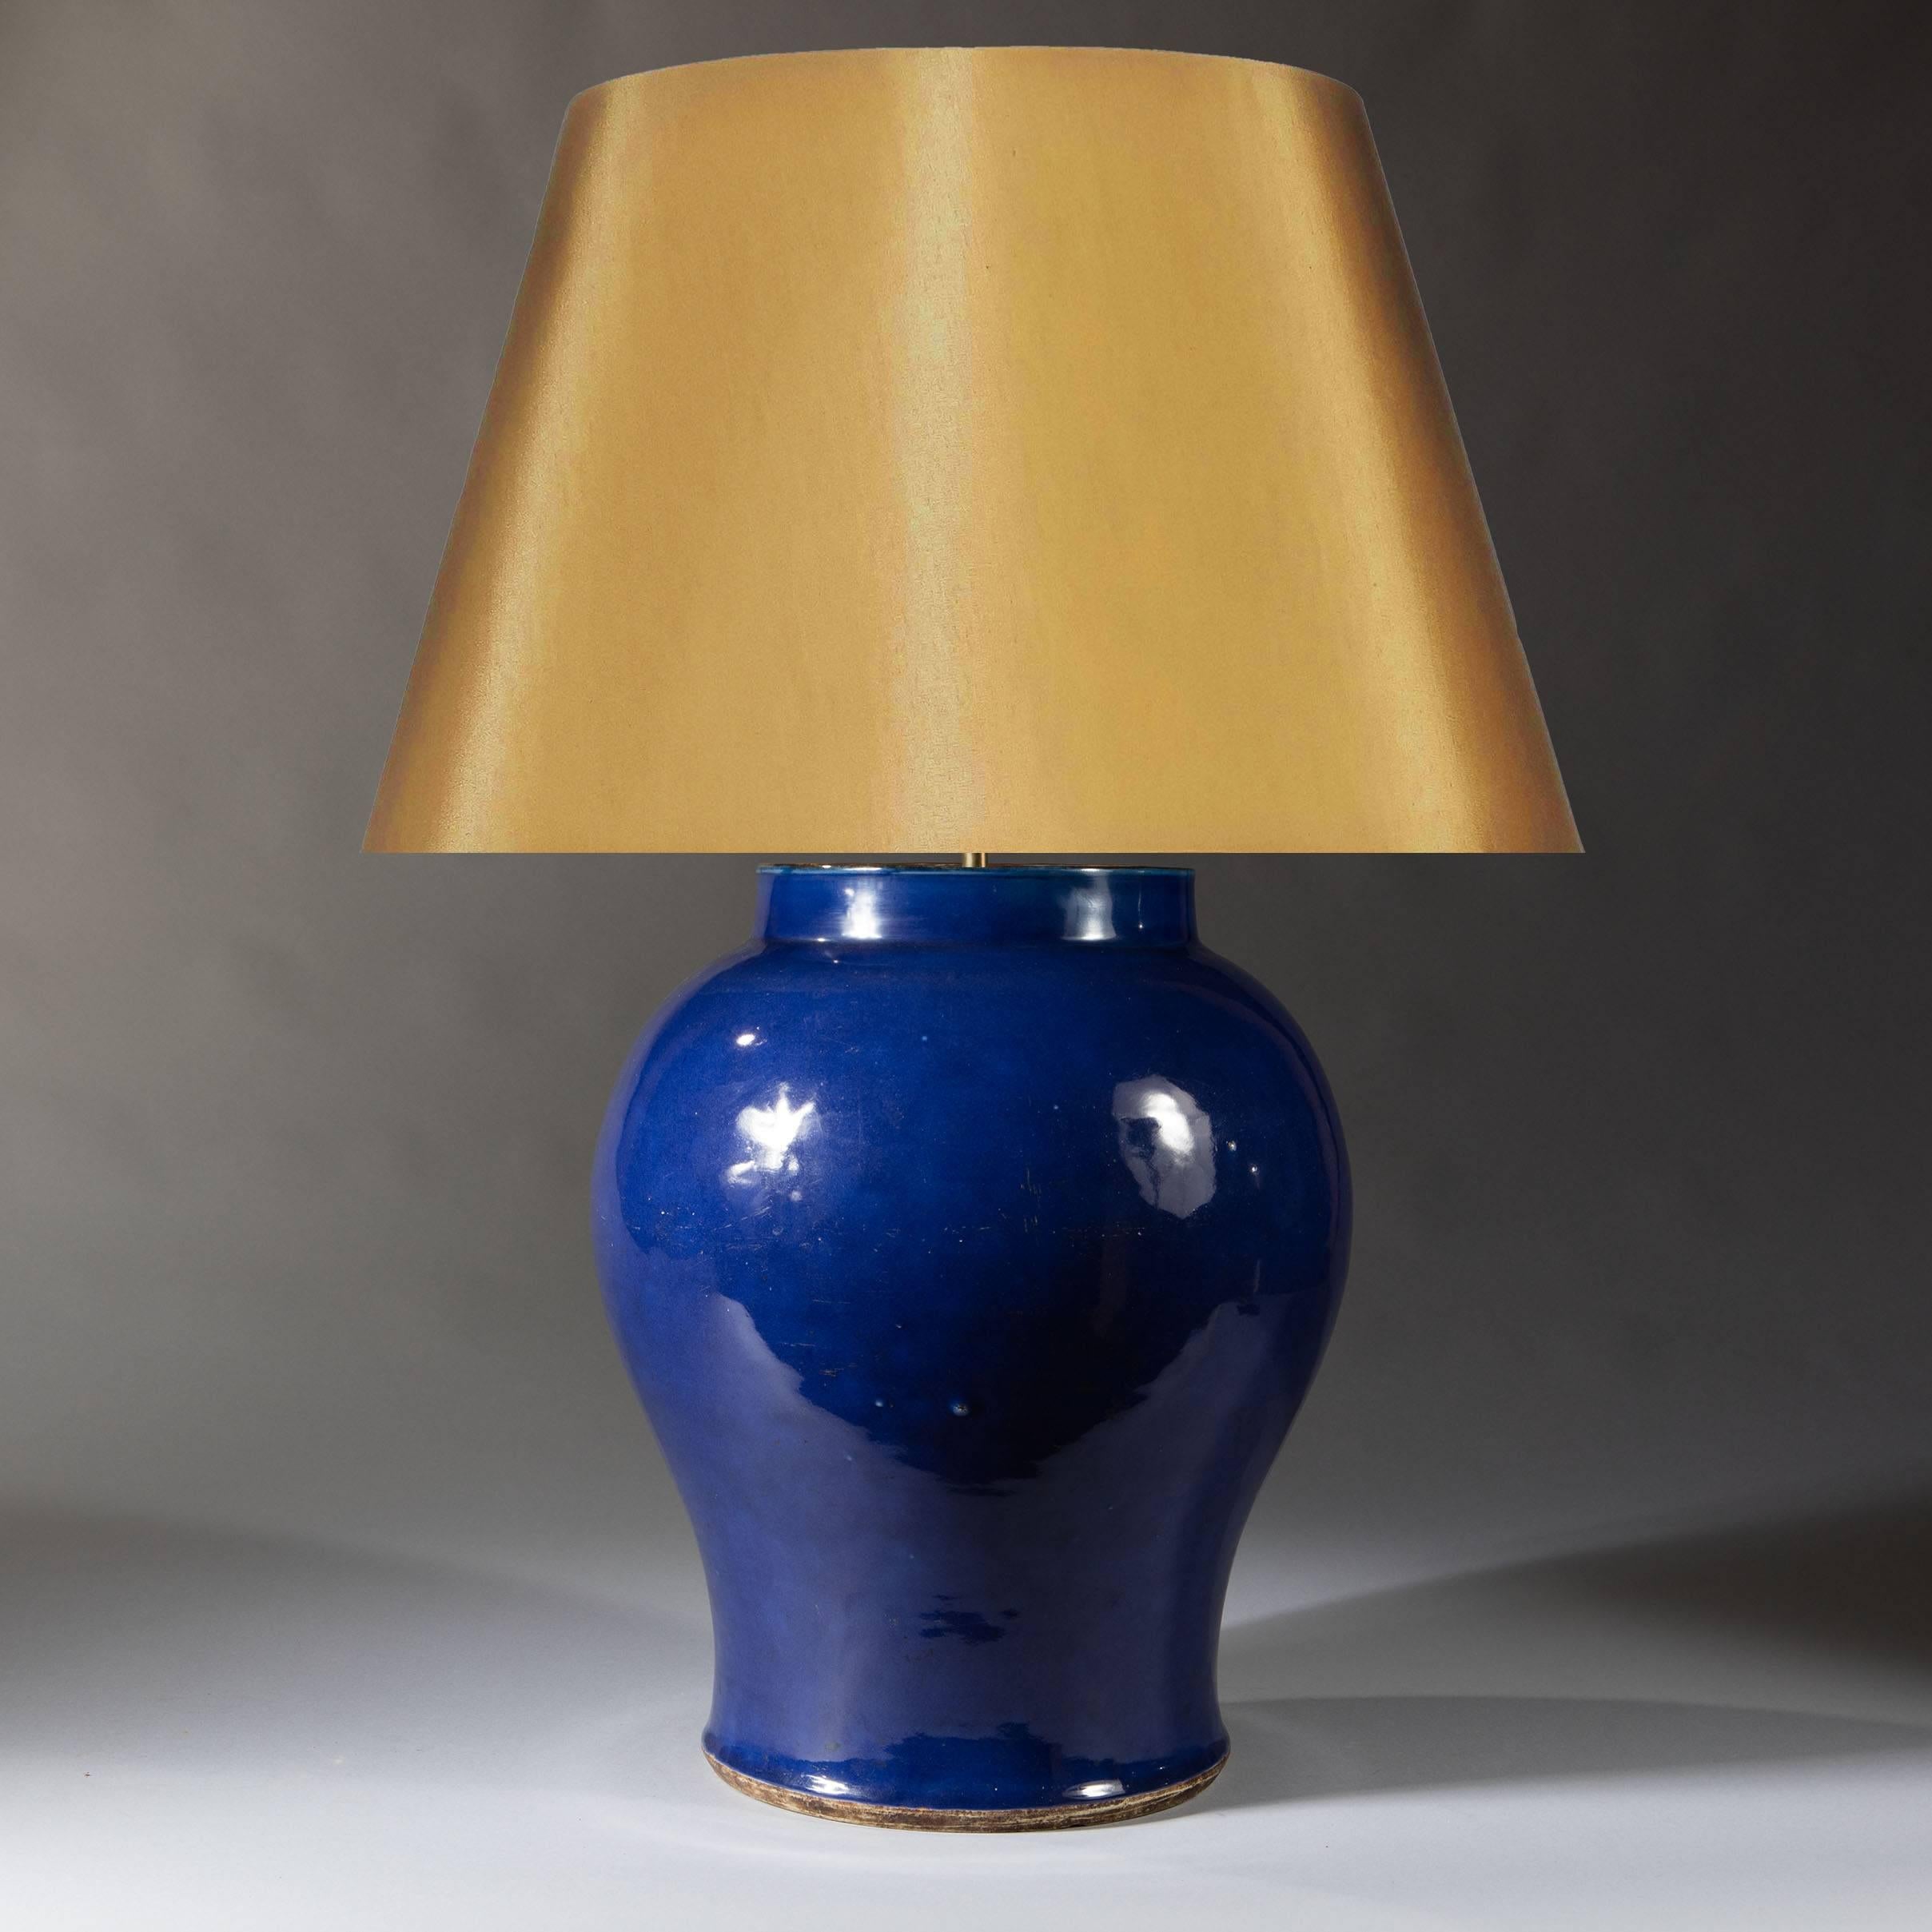 A large 19th century Chinese export monochrome blue glaze vase of baluster form with a dark unglazed rim and foot, now mounted as a lamp. 

Height of vase 18.5inches 47cm
Diameter of Vase 14inches 36cm

Shade not included.